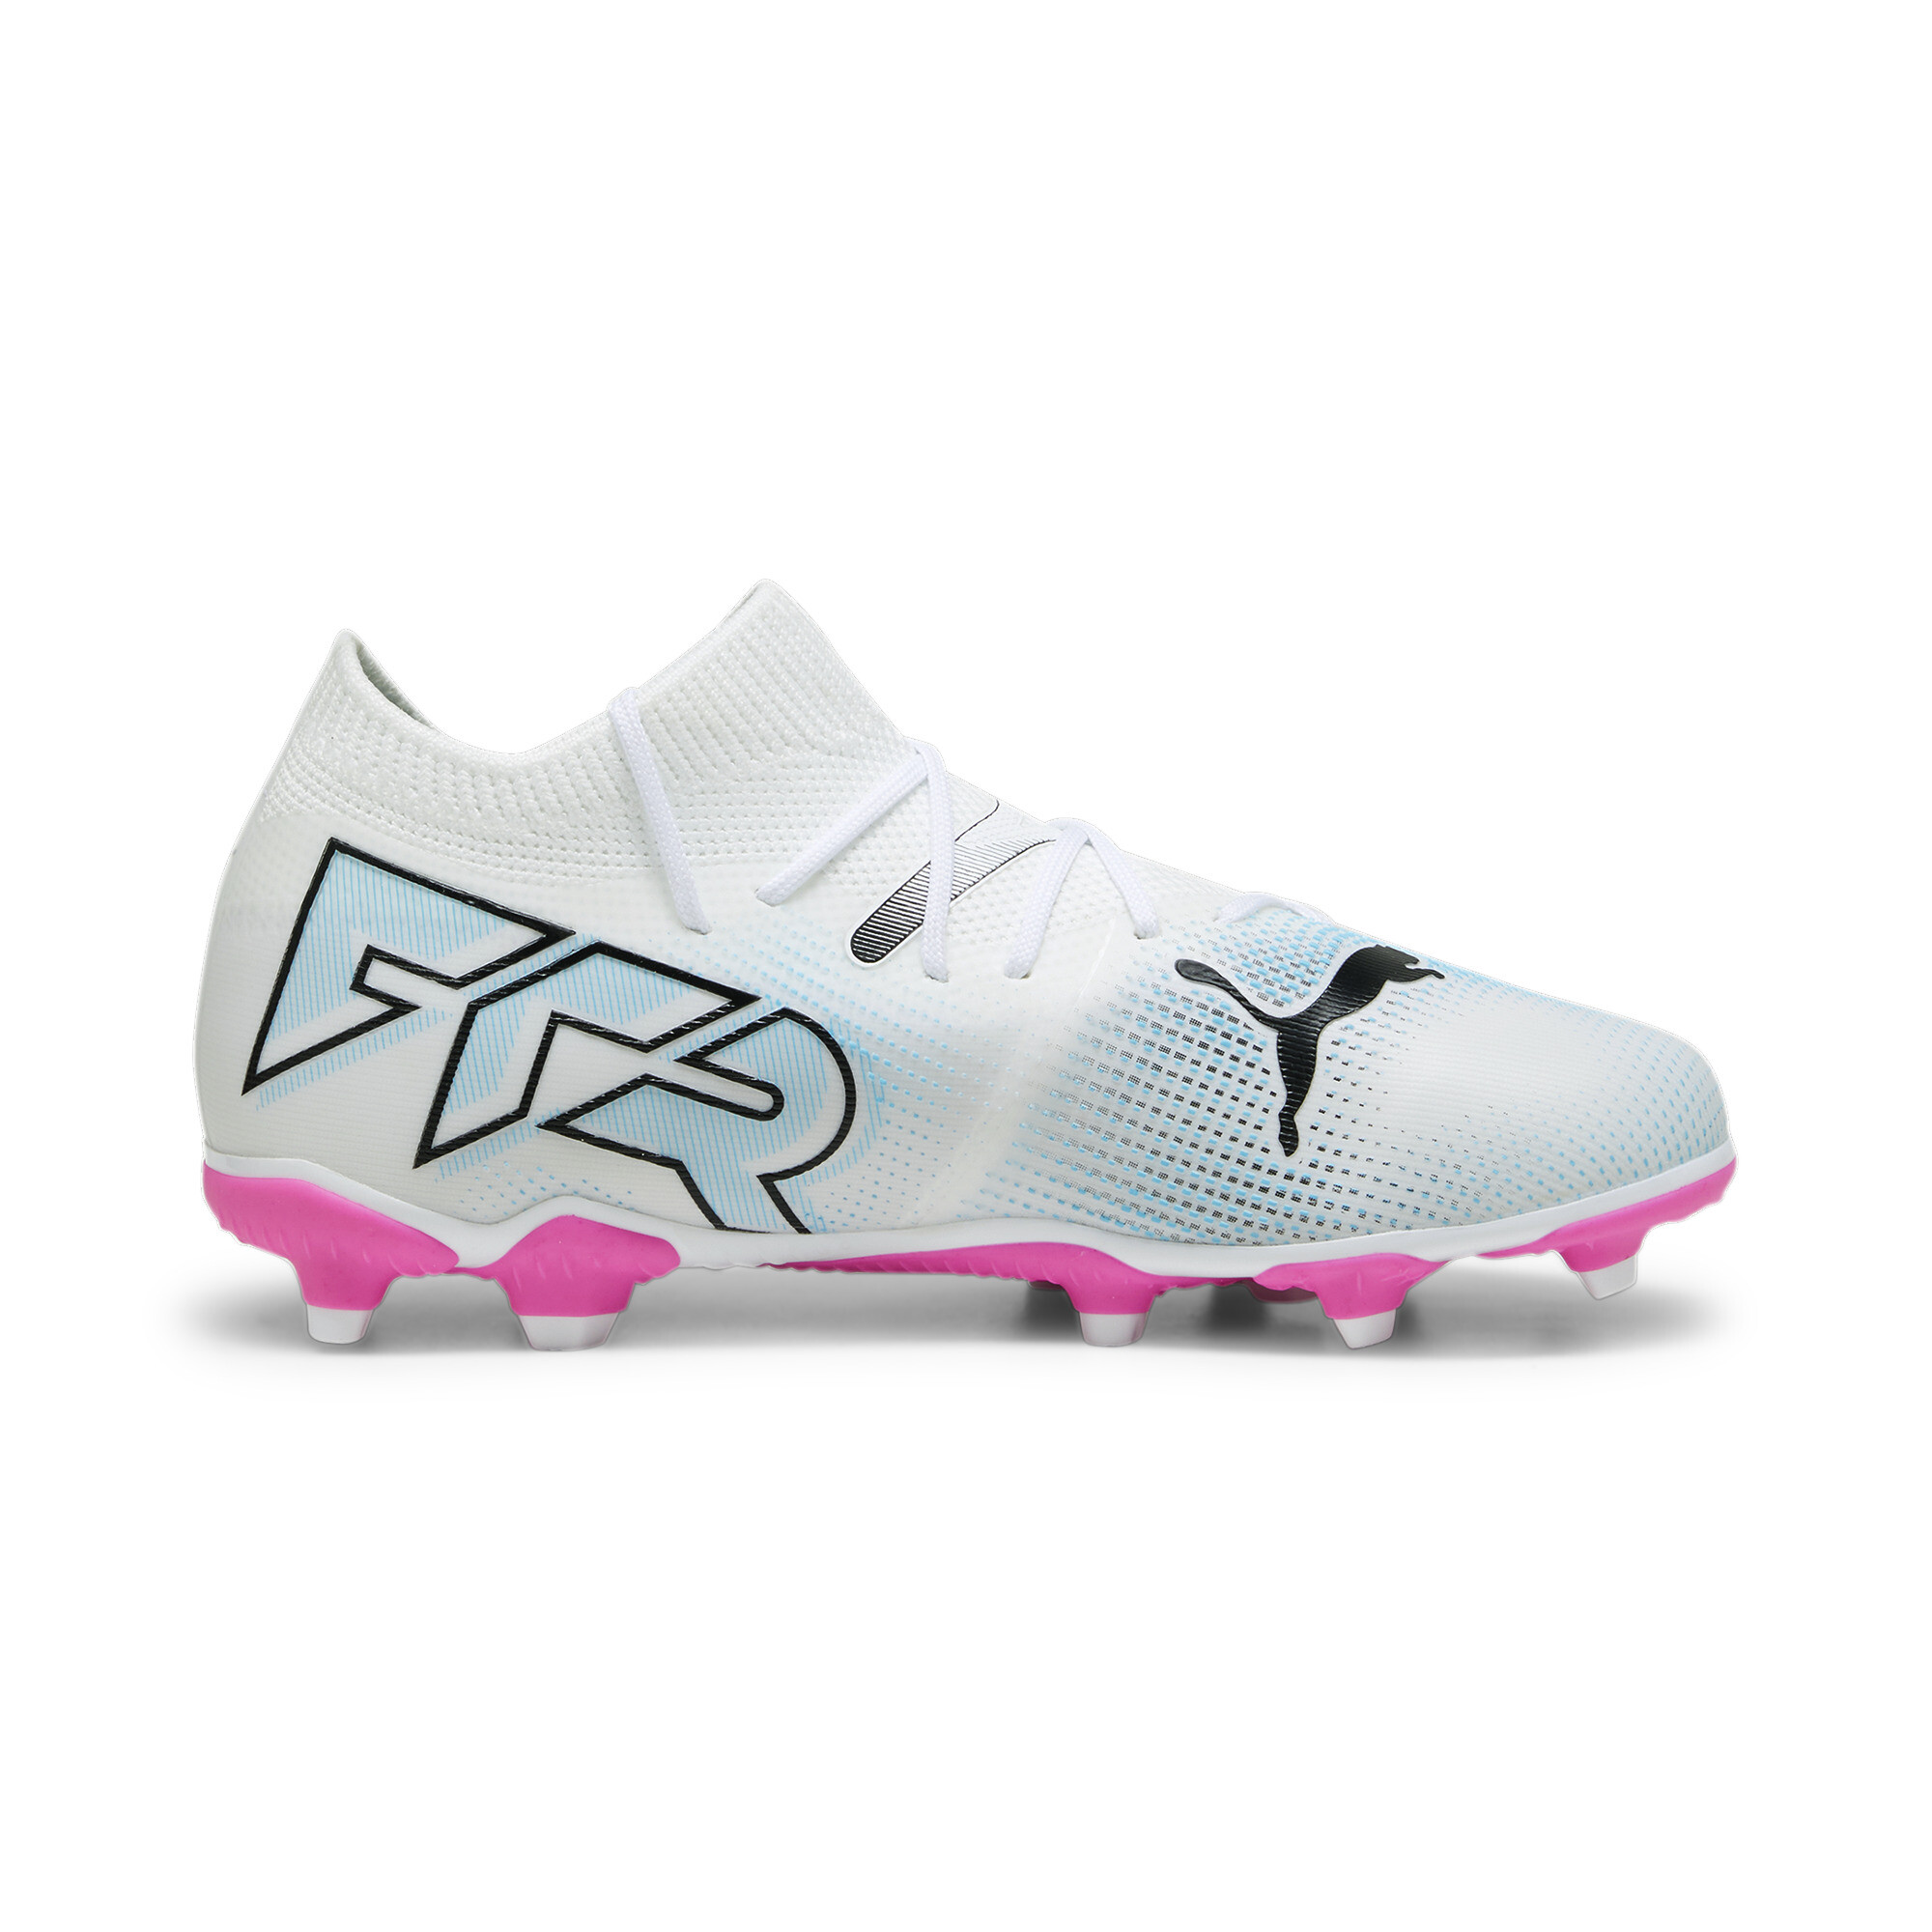 PUMA FUTURE 7 MATCH FG/AG Youth Football Boots In White/Pink, Size EU 37.5